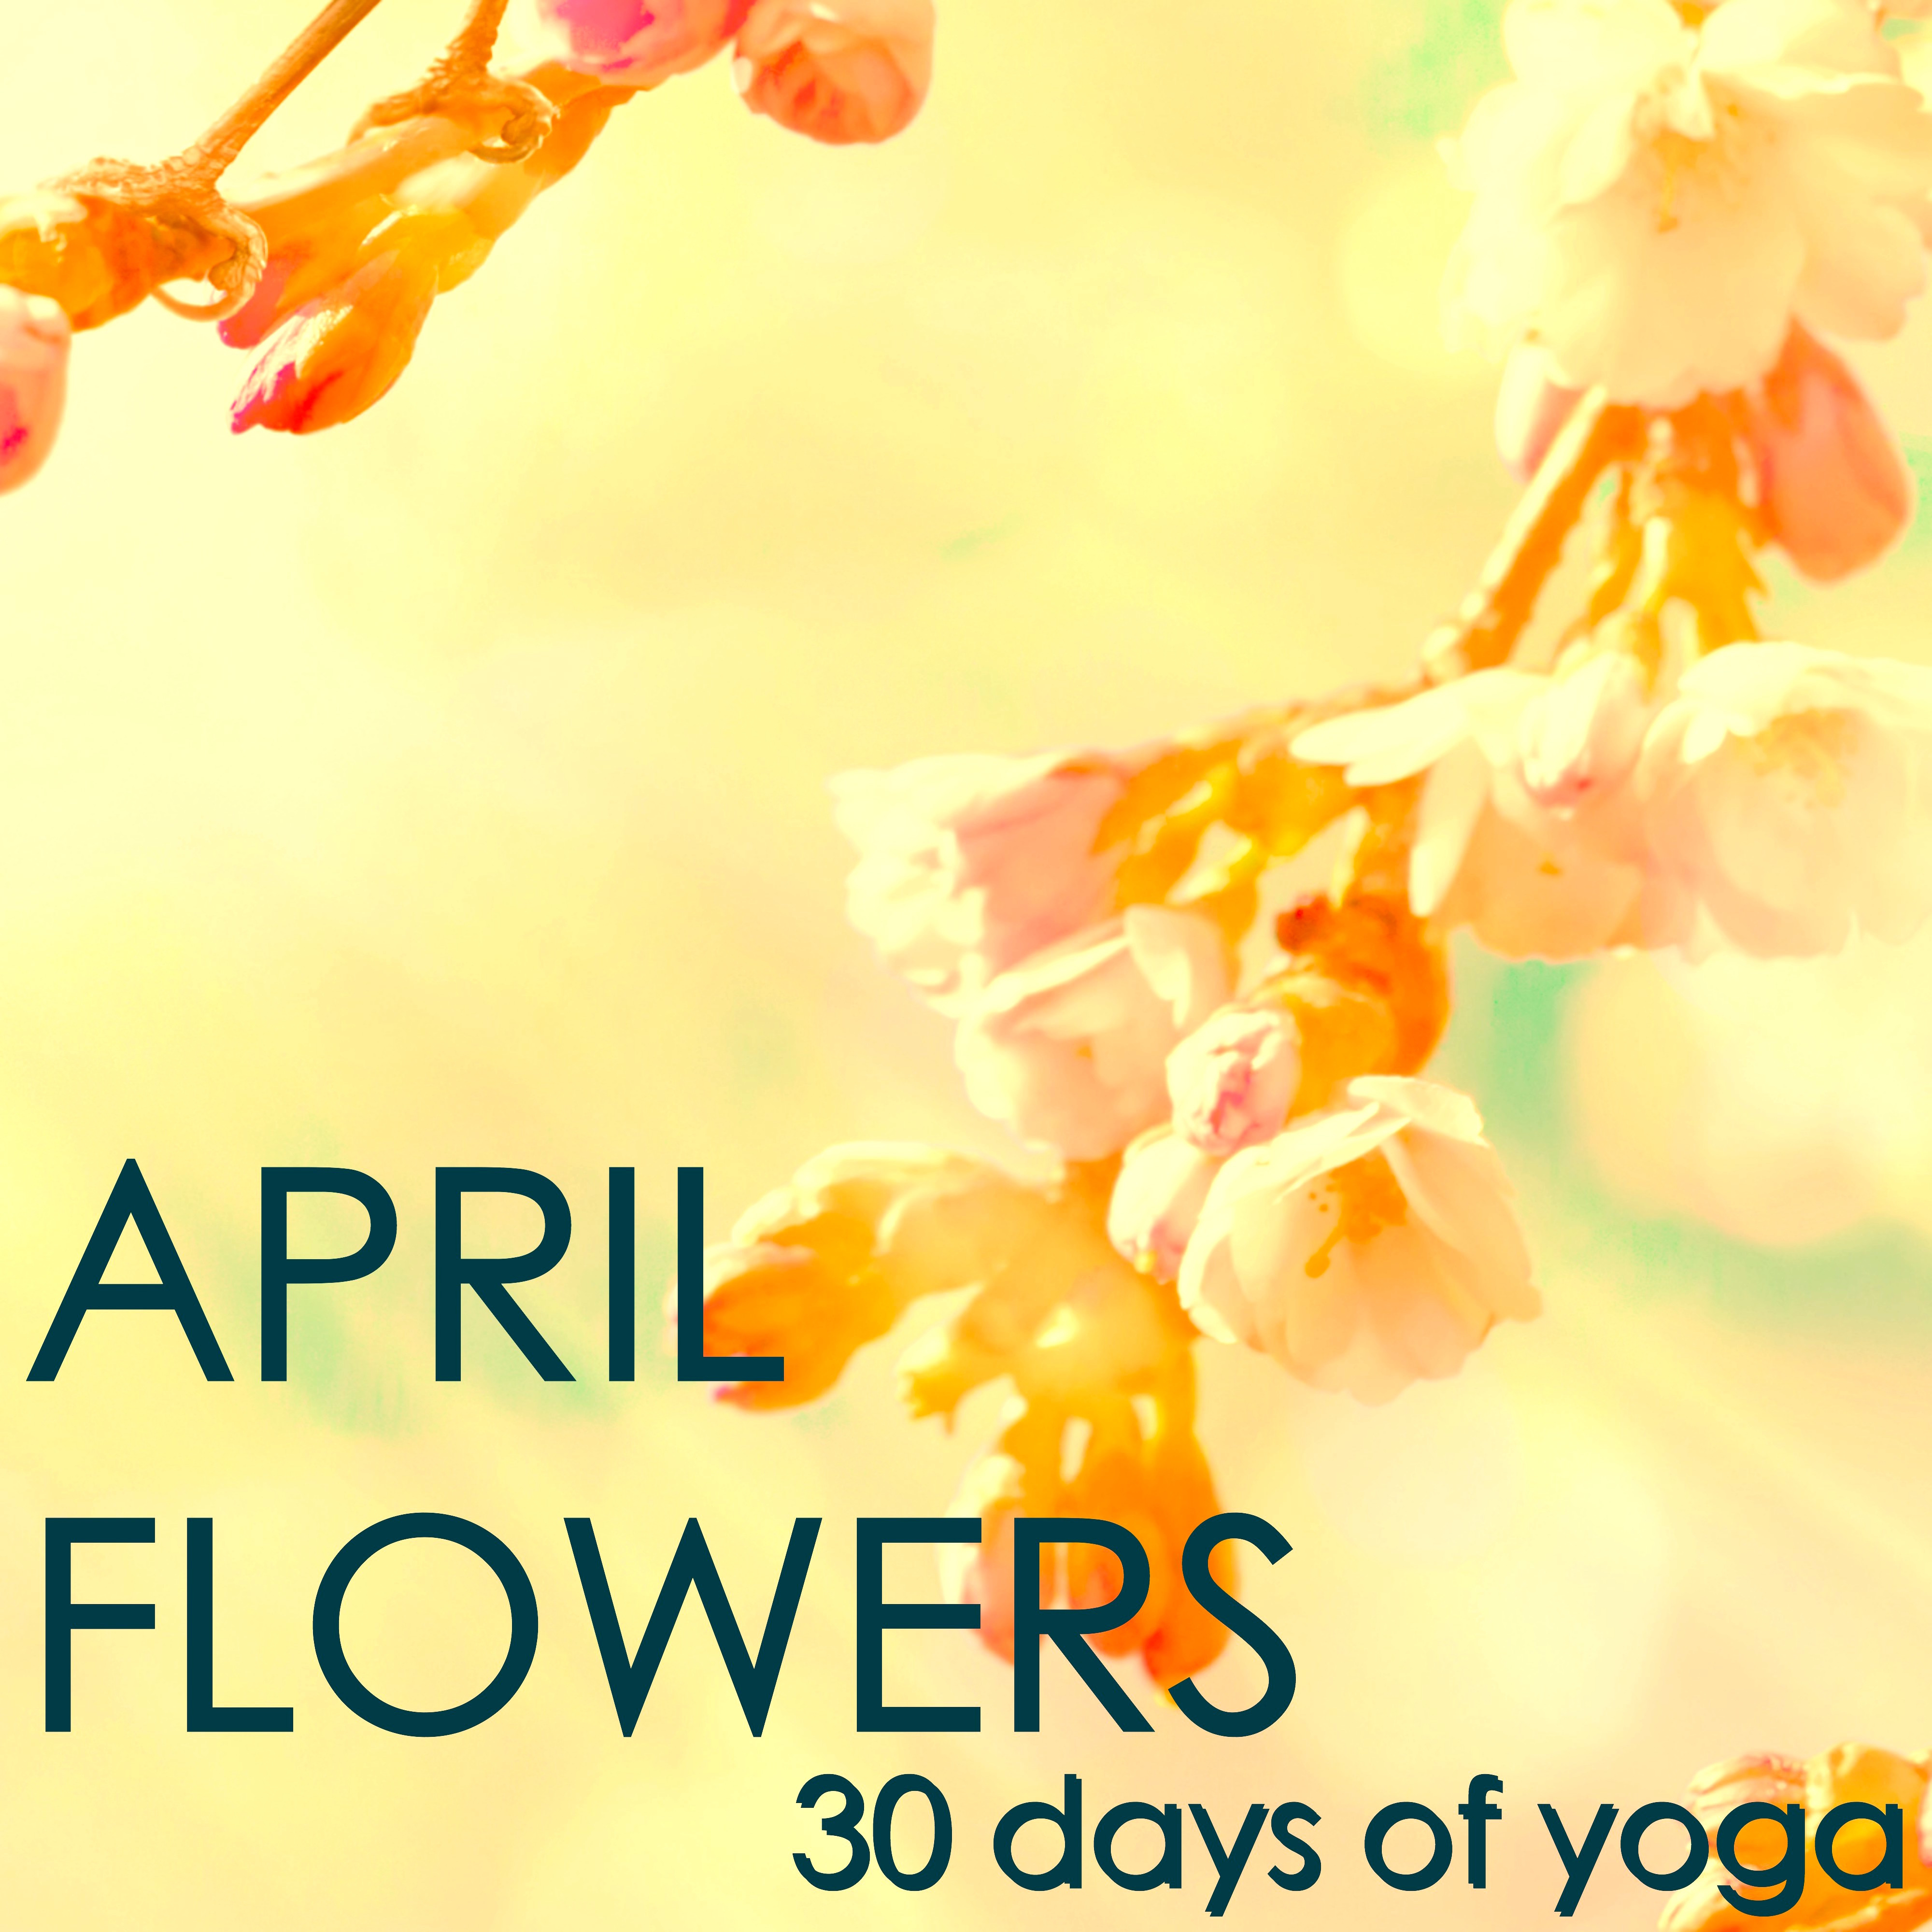 April Flowers - 30 Days of Yoga: Spring Mood and Meditation Yoga Music, Nature Sounds, Bird and Wind for Daily Meditation and Yoga Sun Salutation